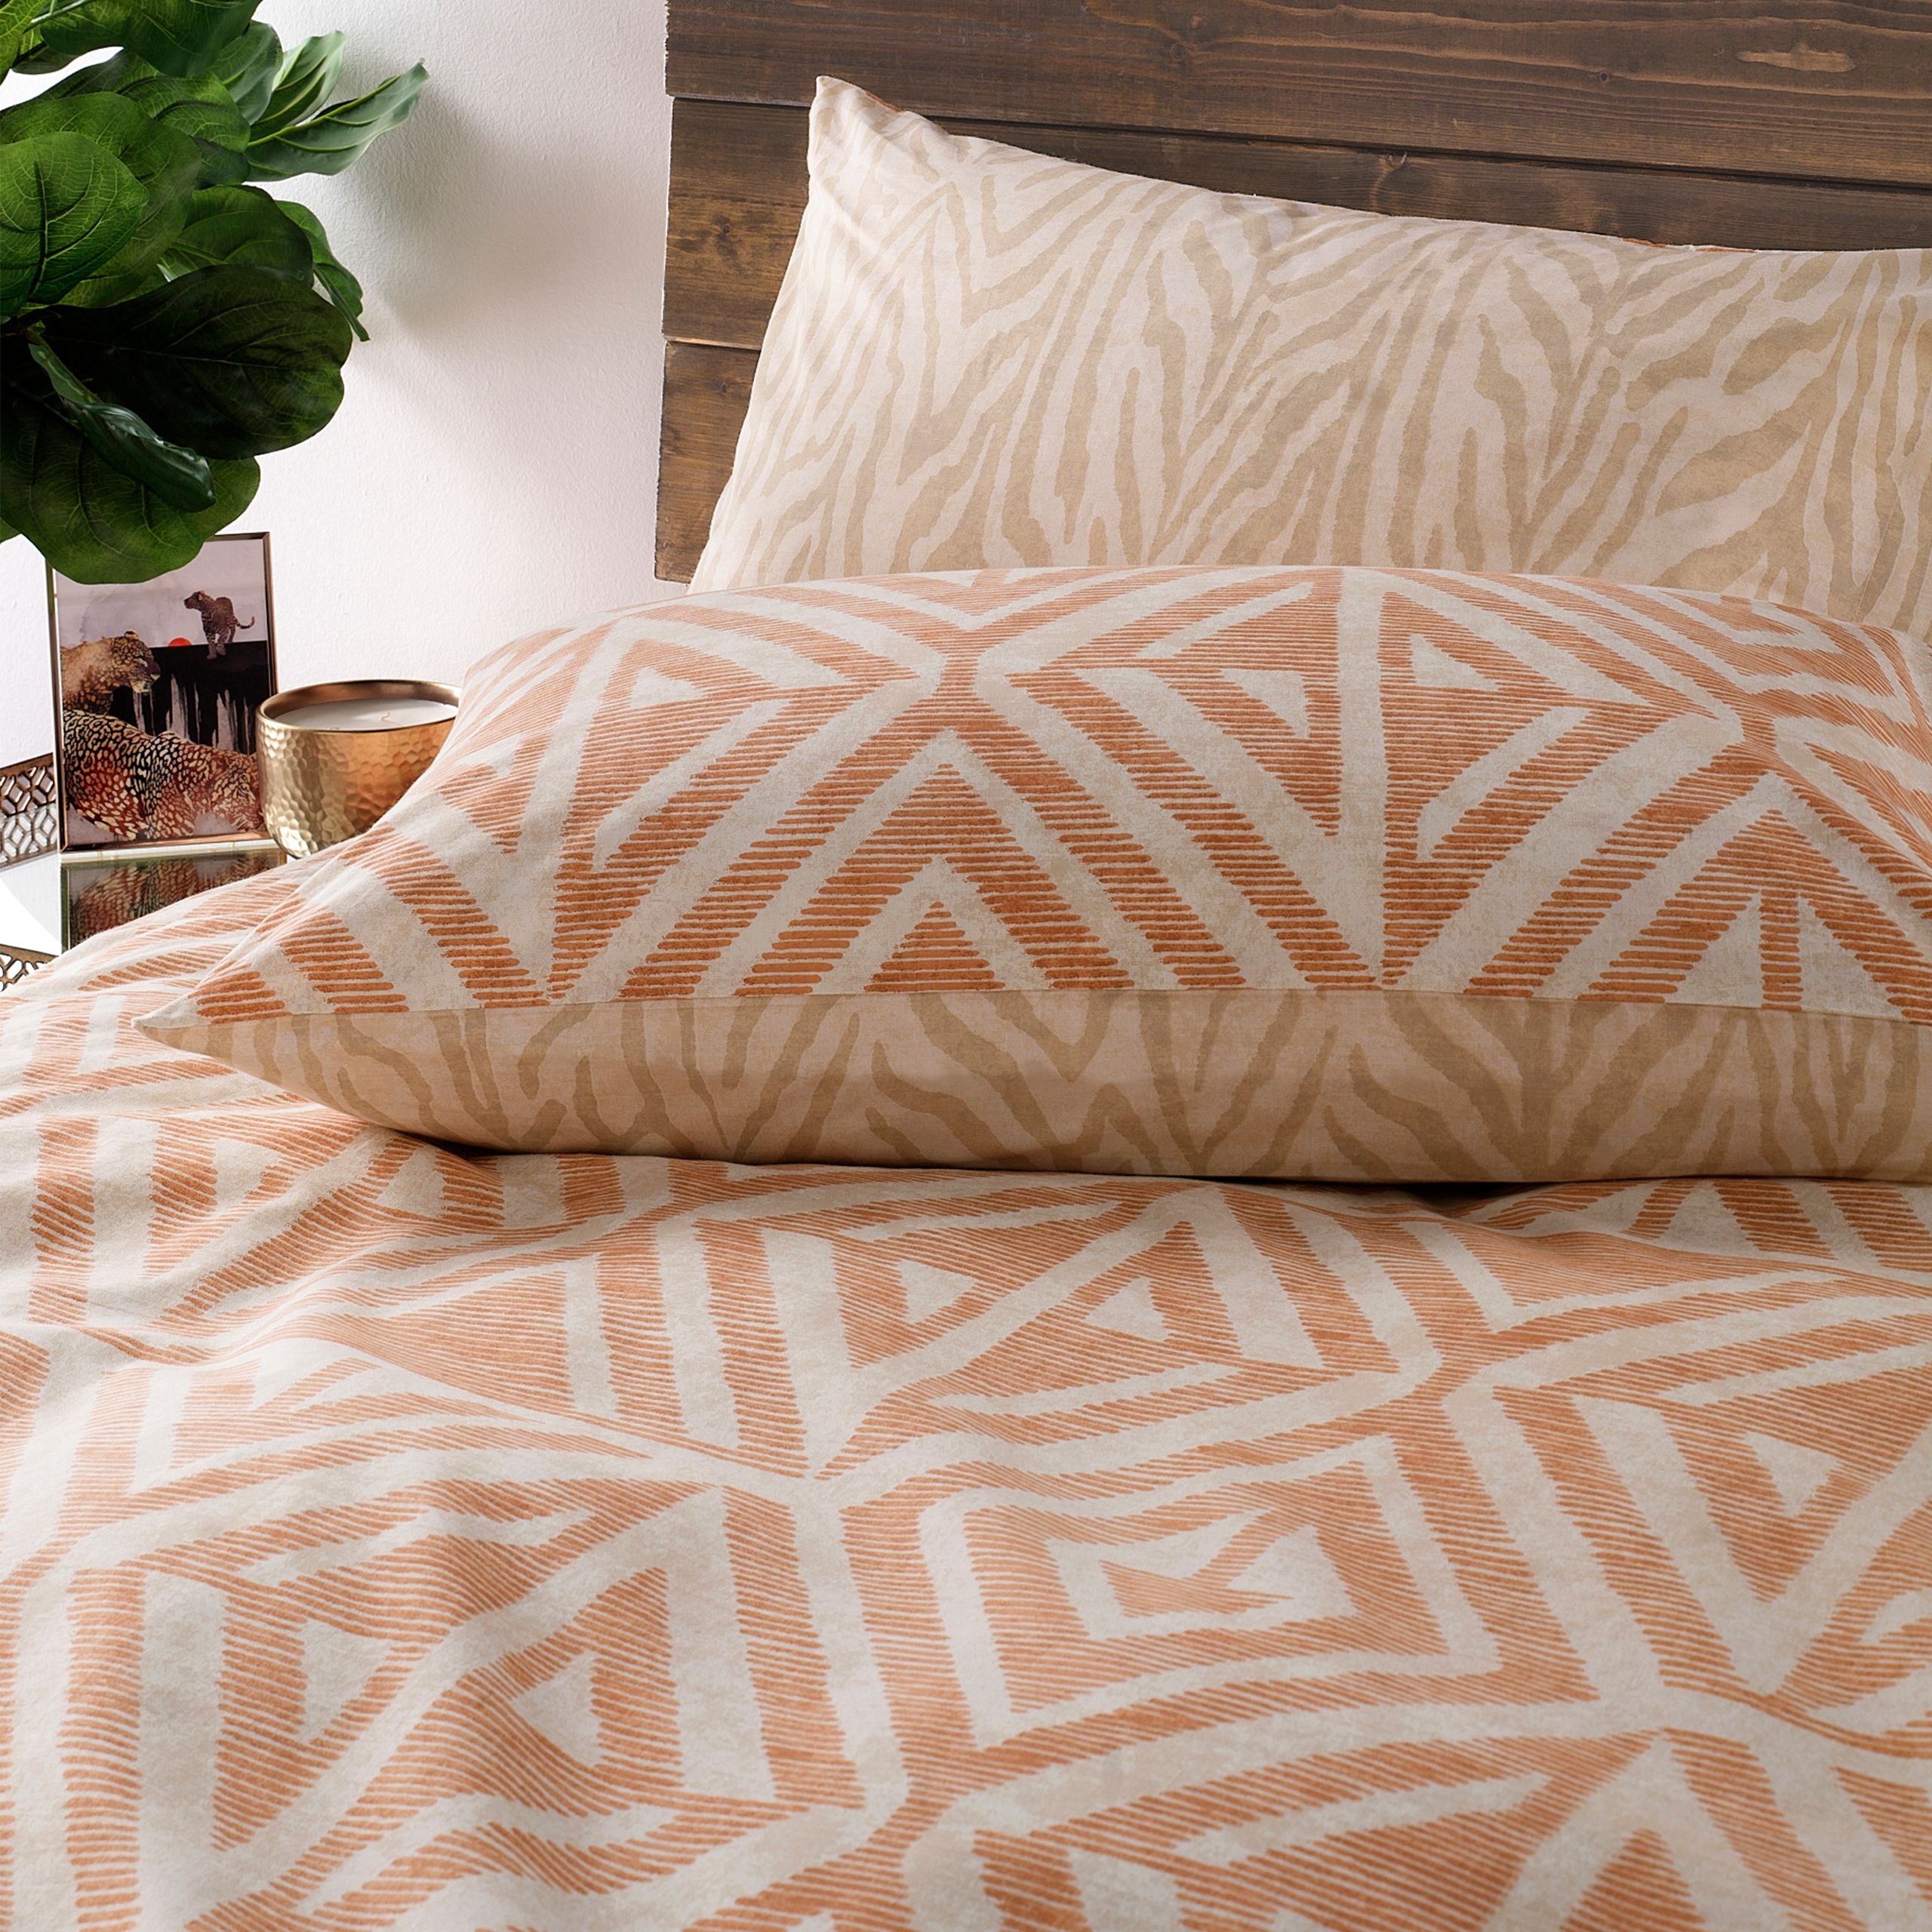 A soft, global-inspired geometric print duvet set and pillow cases - perfect for adding texture and warmth to your bedroom. Featuring a tonal animal print reverse print, for a softer alternative when you need it.